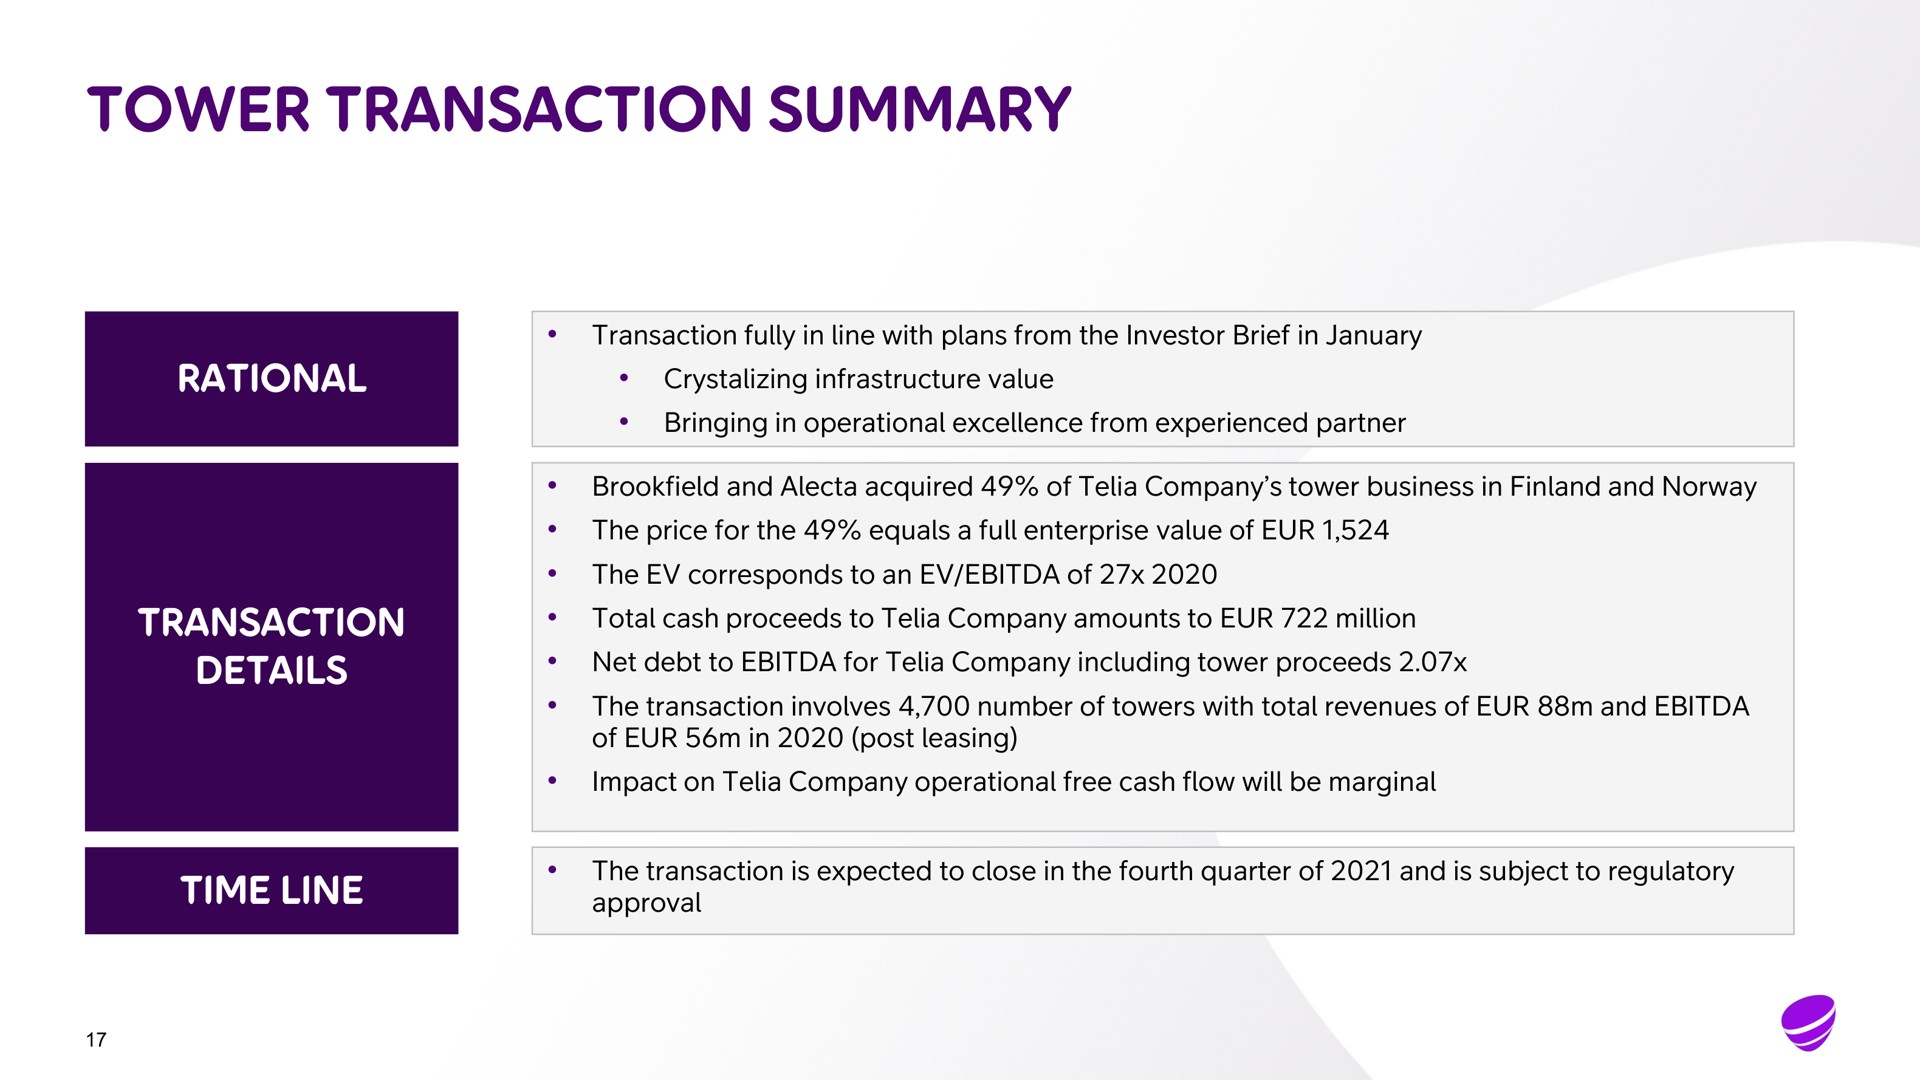 tower transaction summary rational transaction fully in line with plans from the investor brief in infrastructure value bringing in operational excellence from experienced partner the corresponds to an of the price for the equals a full enterprise value of and acquired of company tower business in finland and net debt to for company including tower proceeds the transaction involves number of towers with total revenues of and of in post leasing total cash proceeds to company amounts to million impact on company operational free cash flow will be marginal the transaction is expected to close in the fourth quarter of and is subject to regulatory approval transaction details time line as | Telia Company